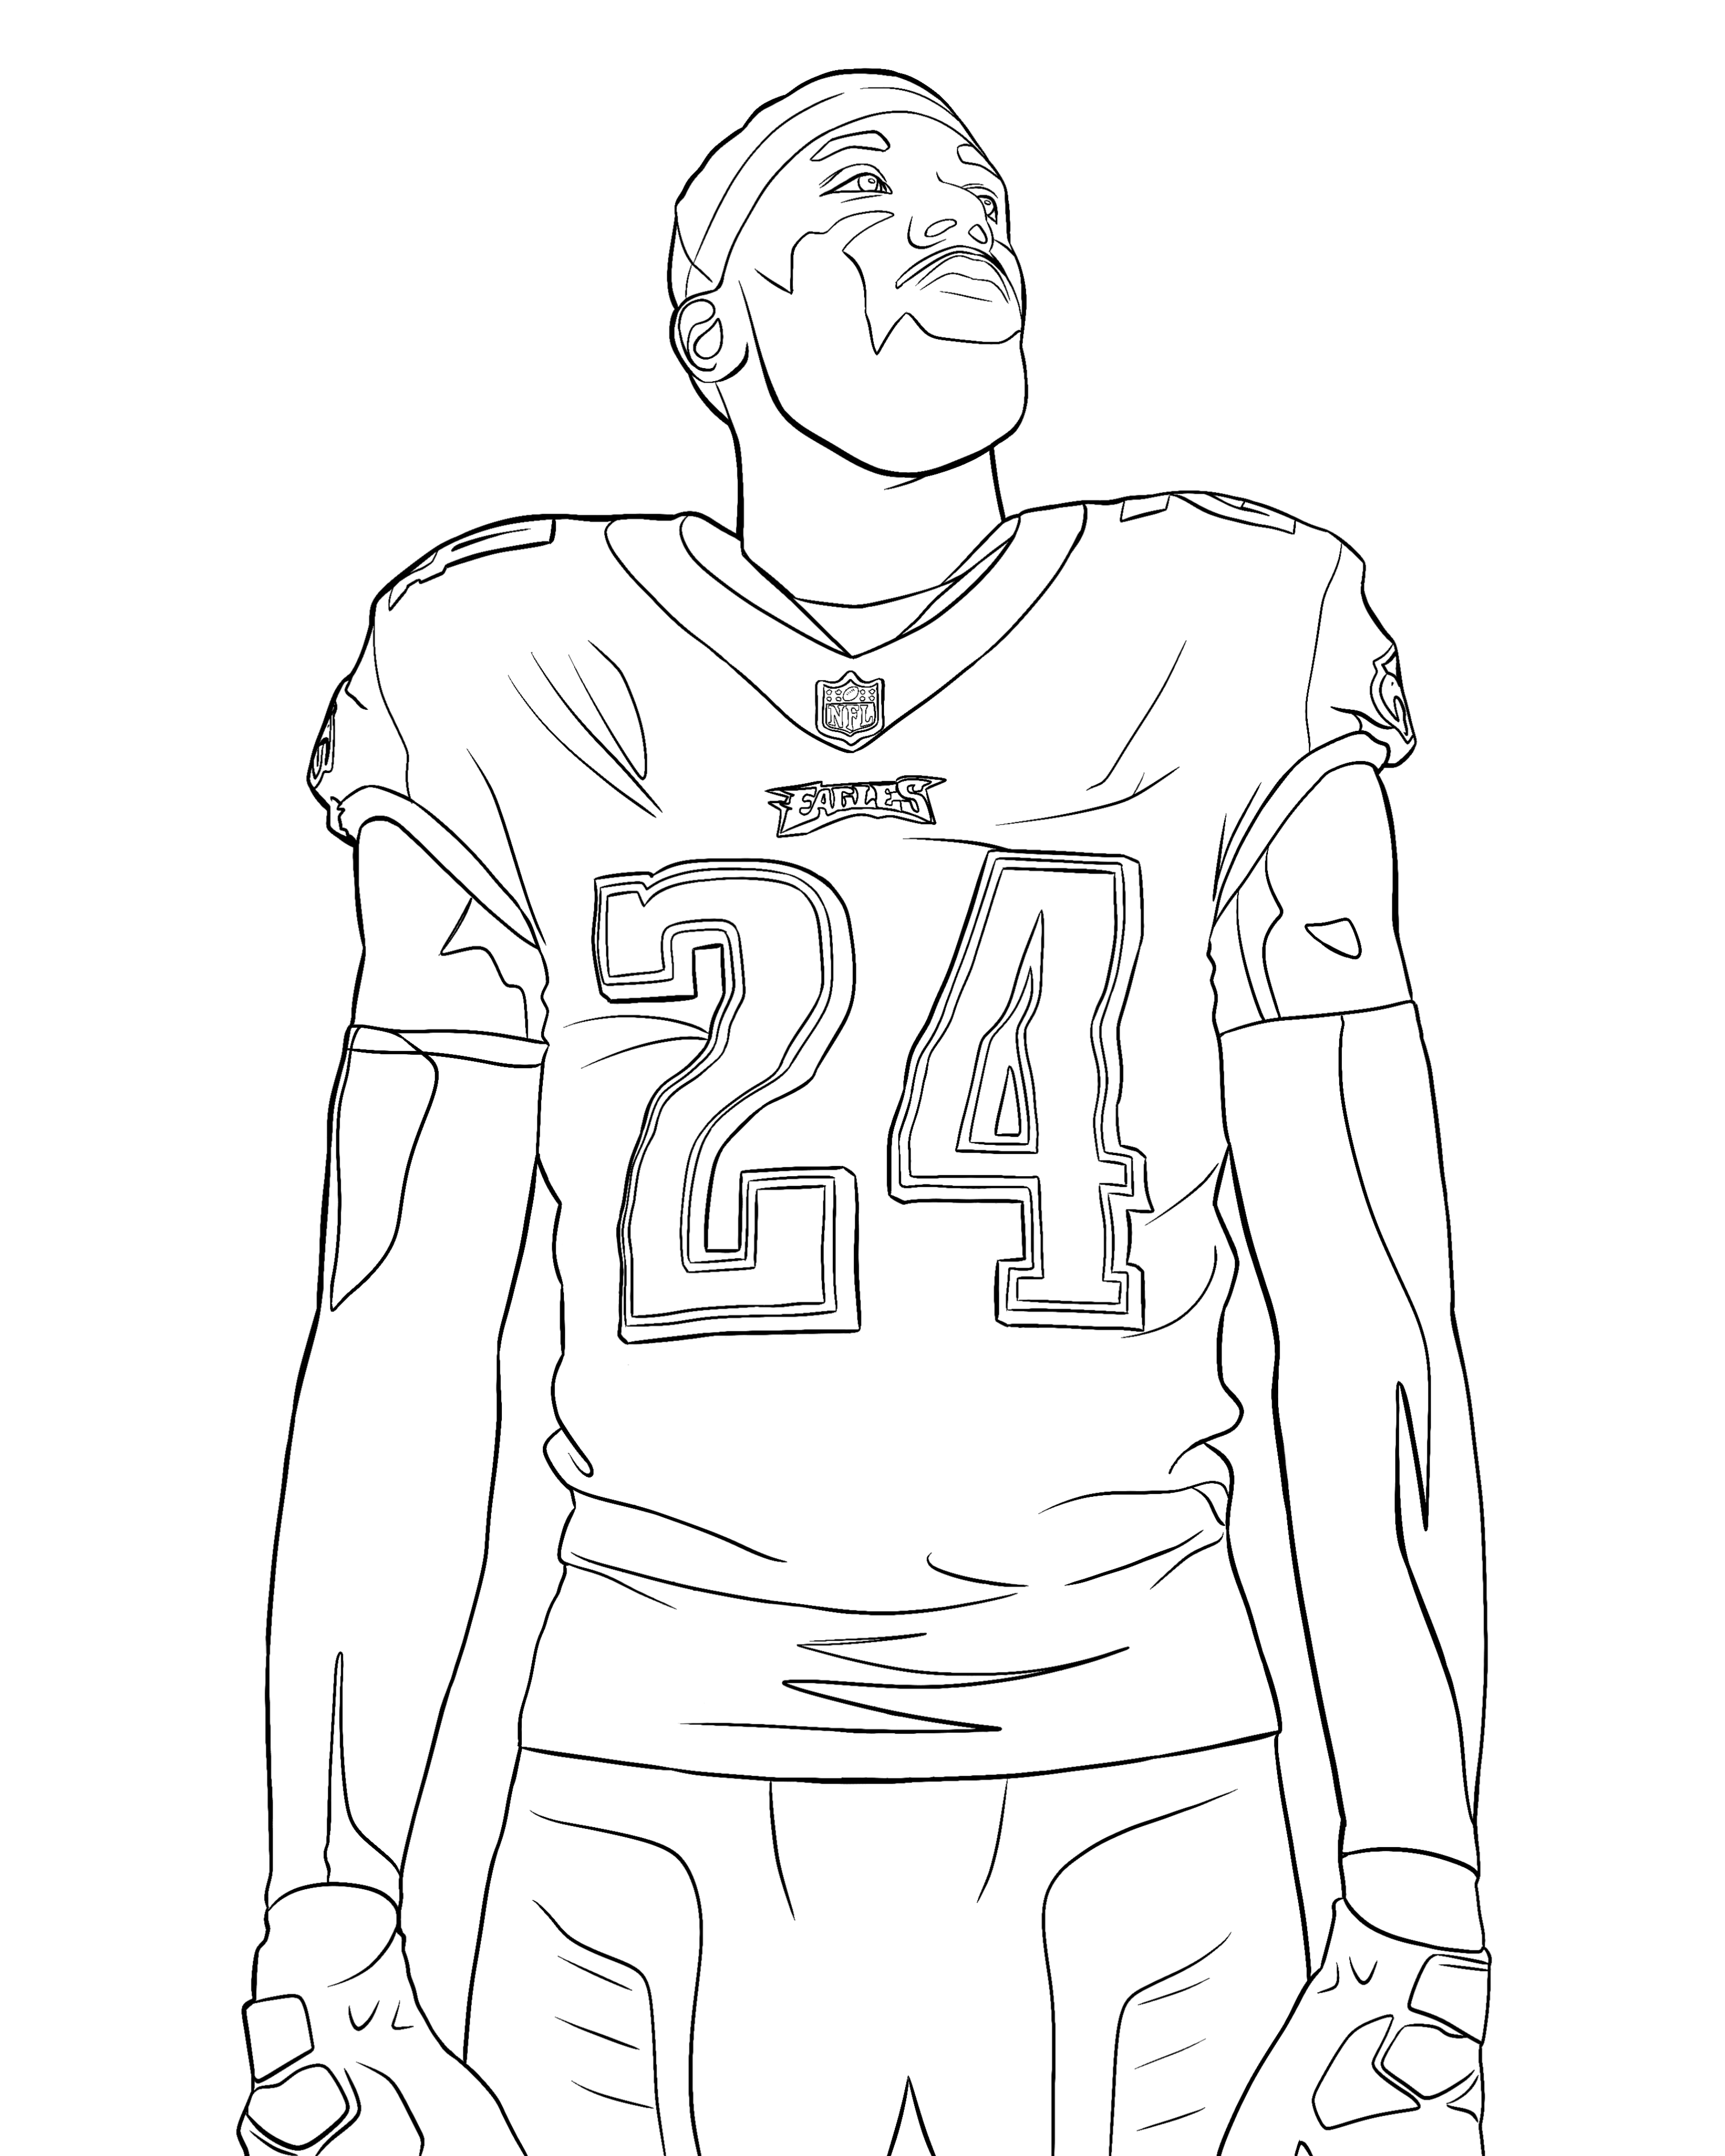 Philadelphia eagles on x who wants to color ps make sure to send us your finished pages ð flyeaglesfly httpstcoywujbcdb x